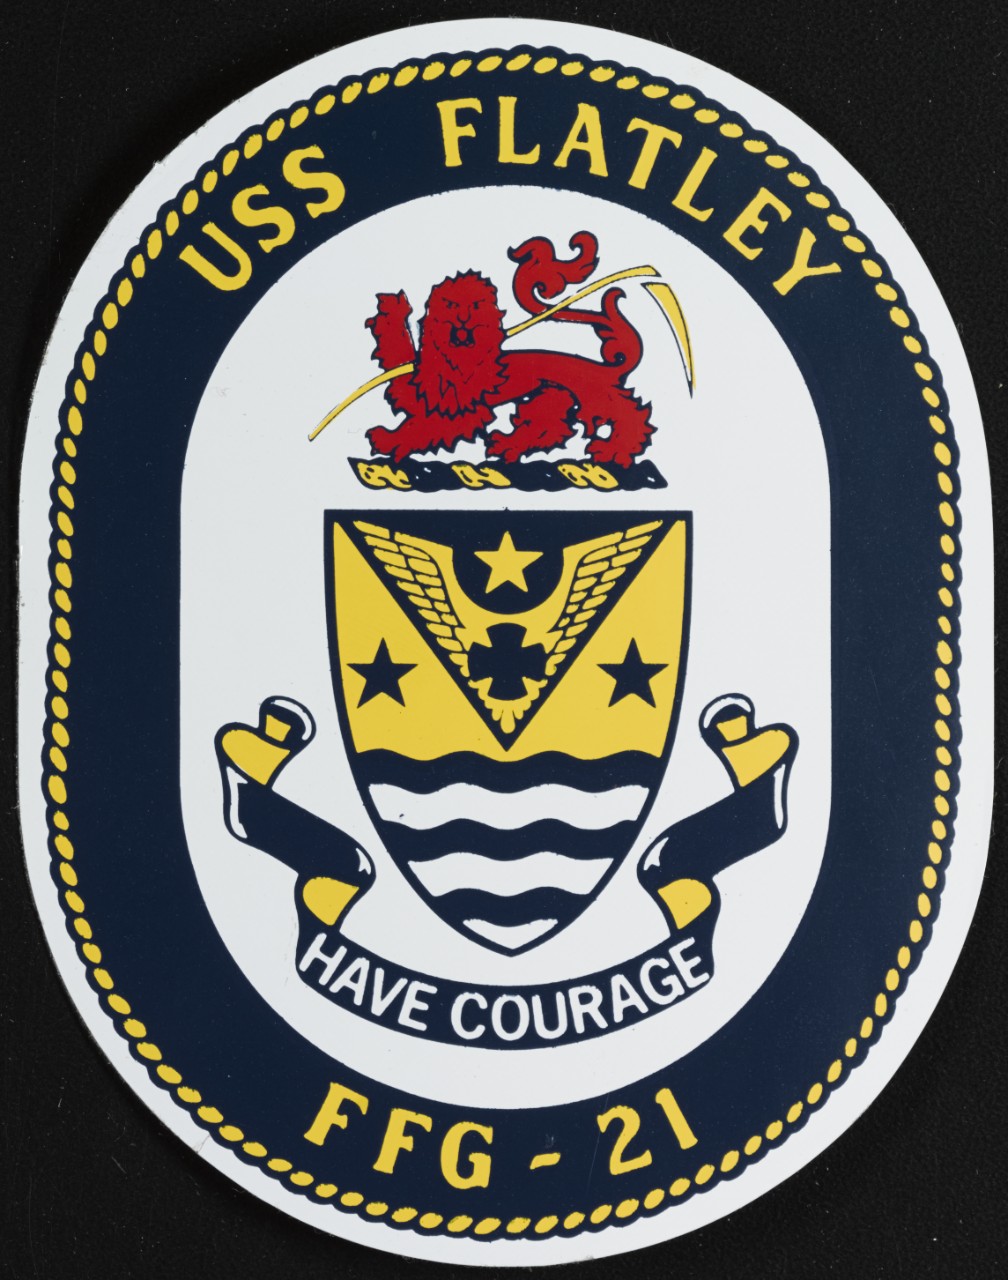 Insignia: USS FLATLEY (FFG-21) "Have Courage"